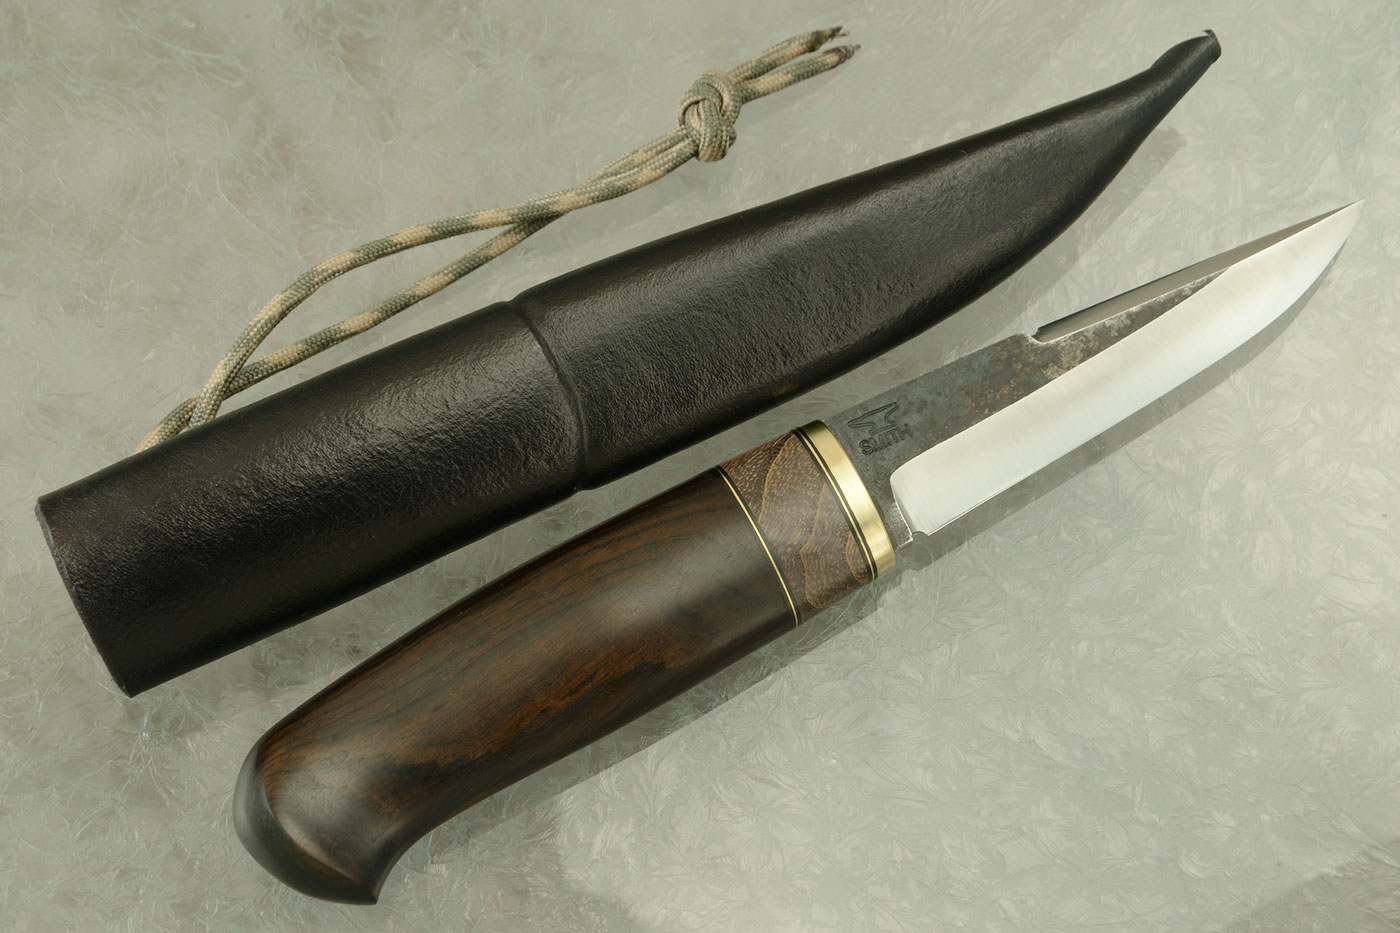 Hunter/Utility with African Blackwood and Ash